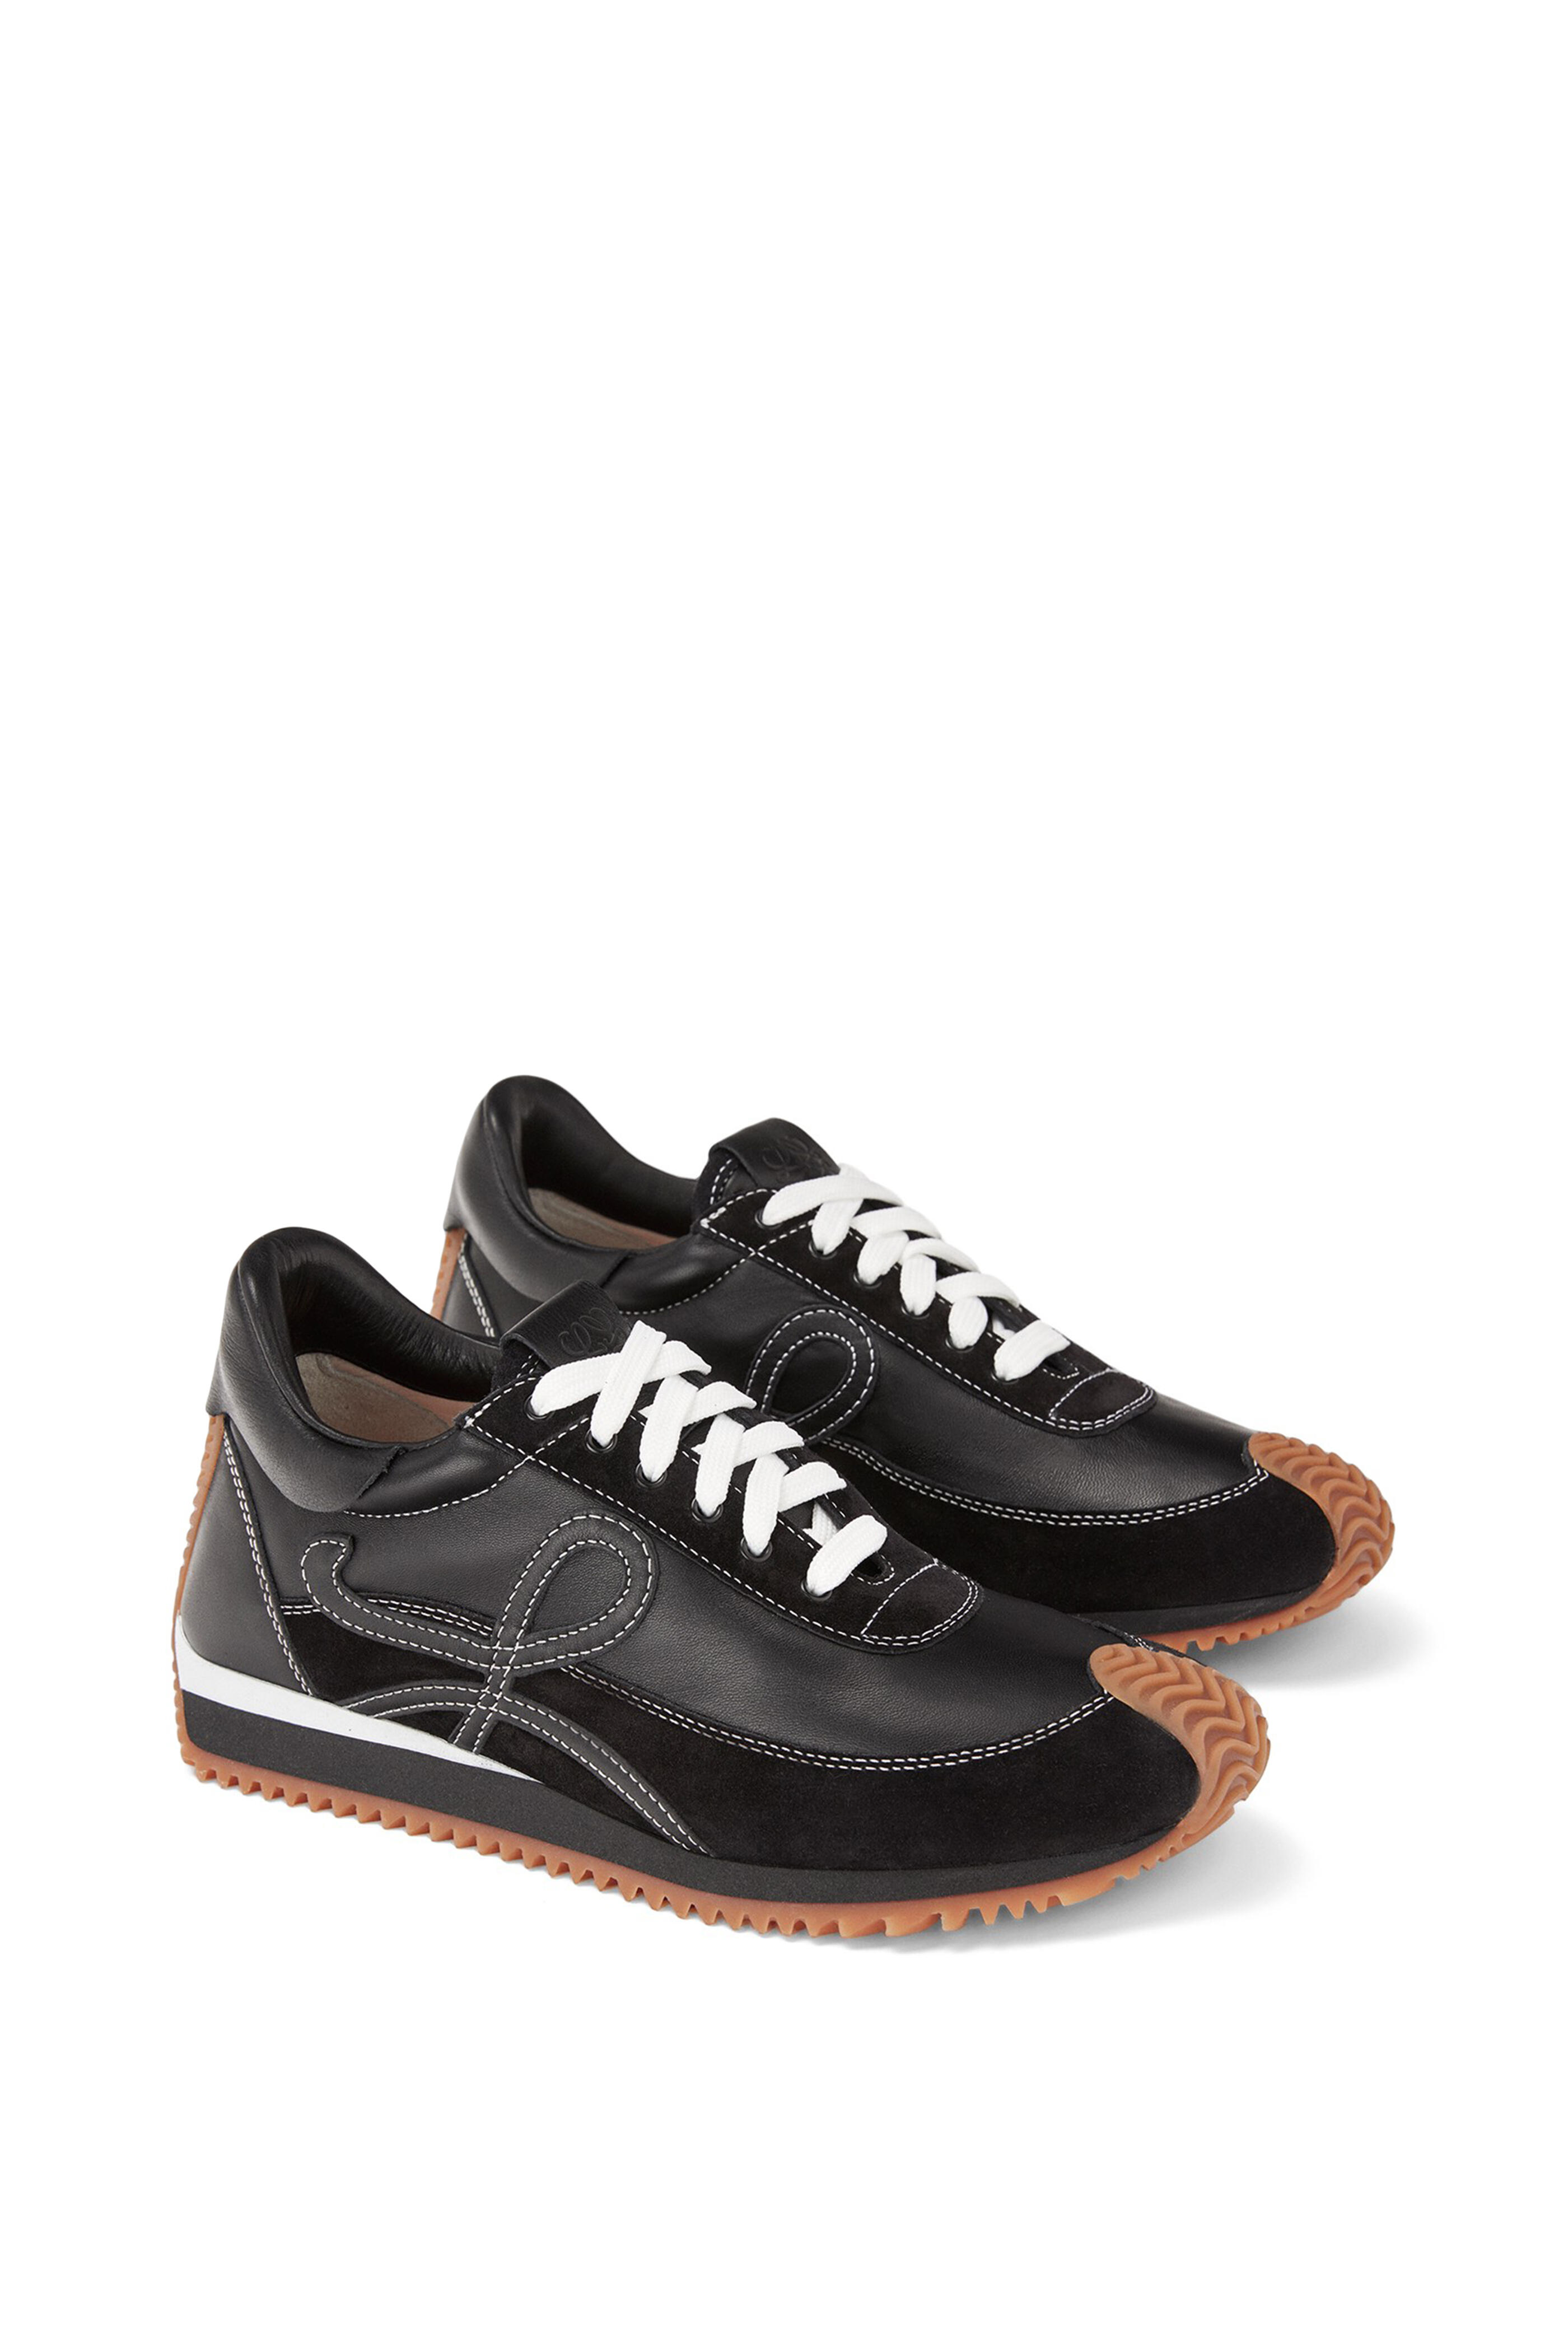 Loewe - Flow Black Leather & Suede Runner | Mitchell Stores